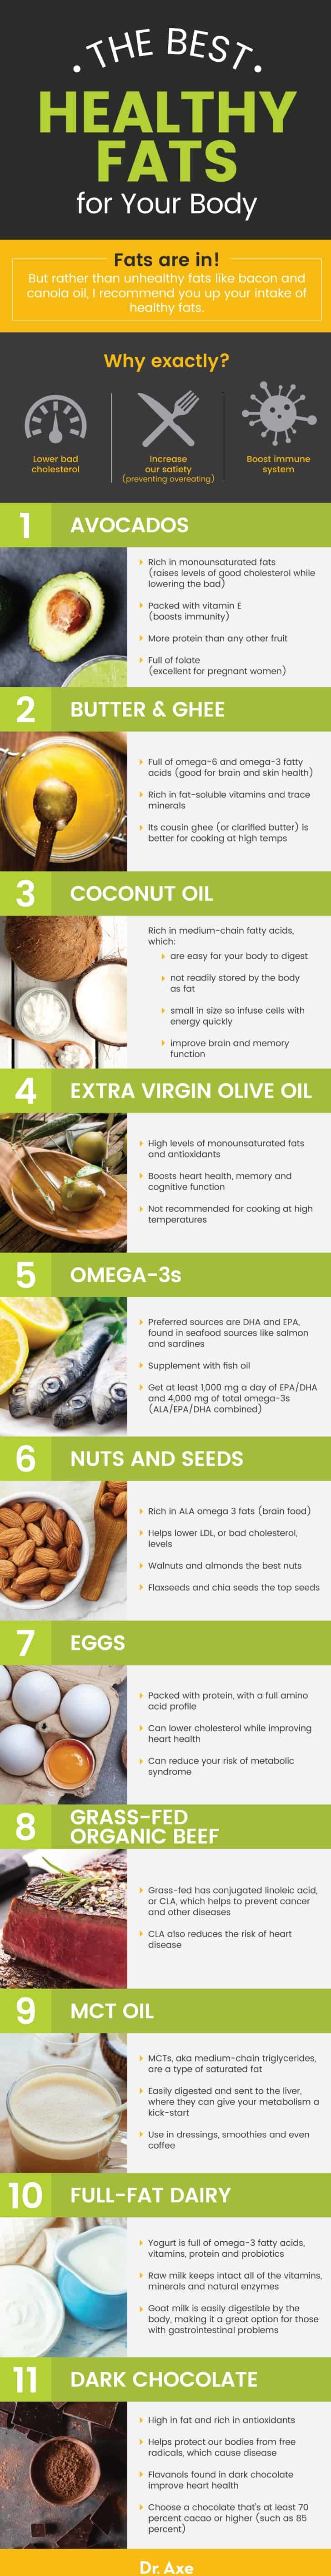 Healthy fats guide - Dr. Axe